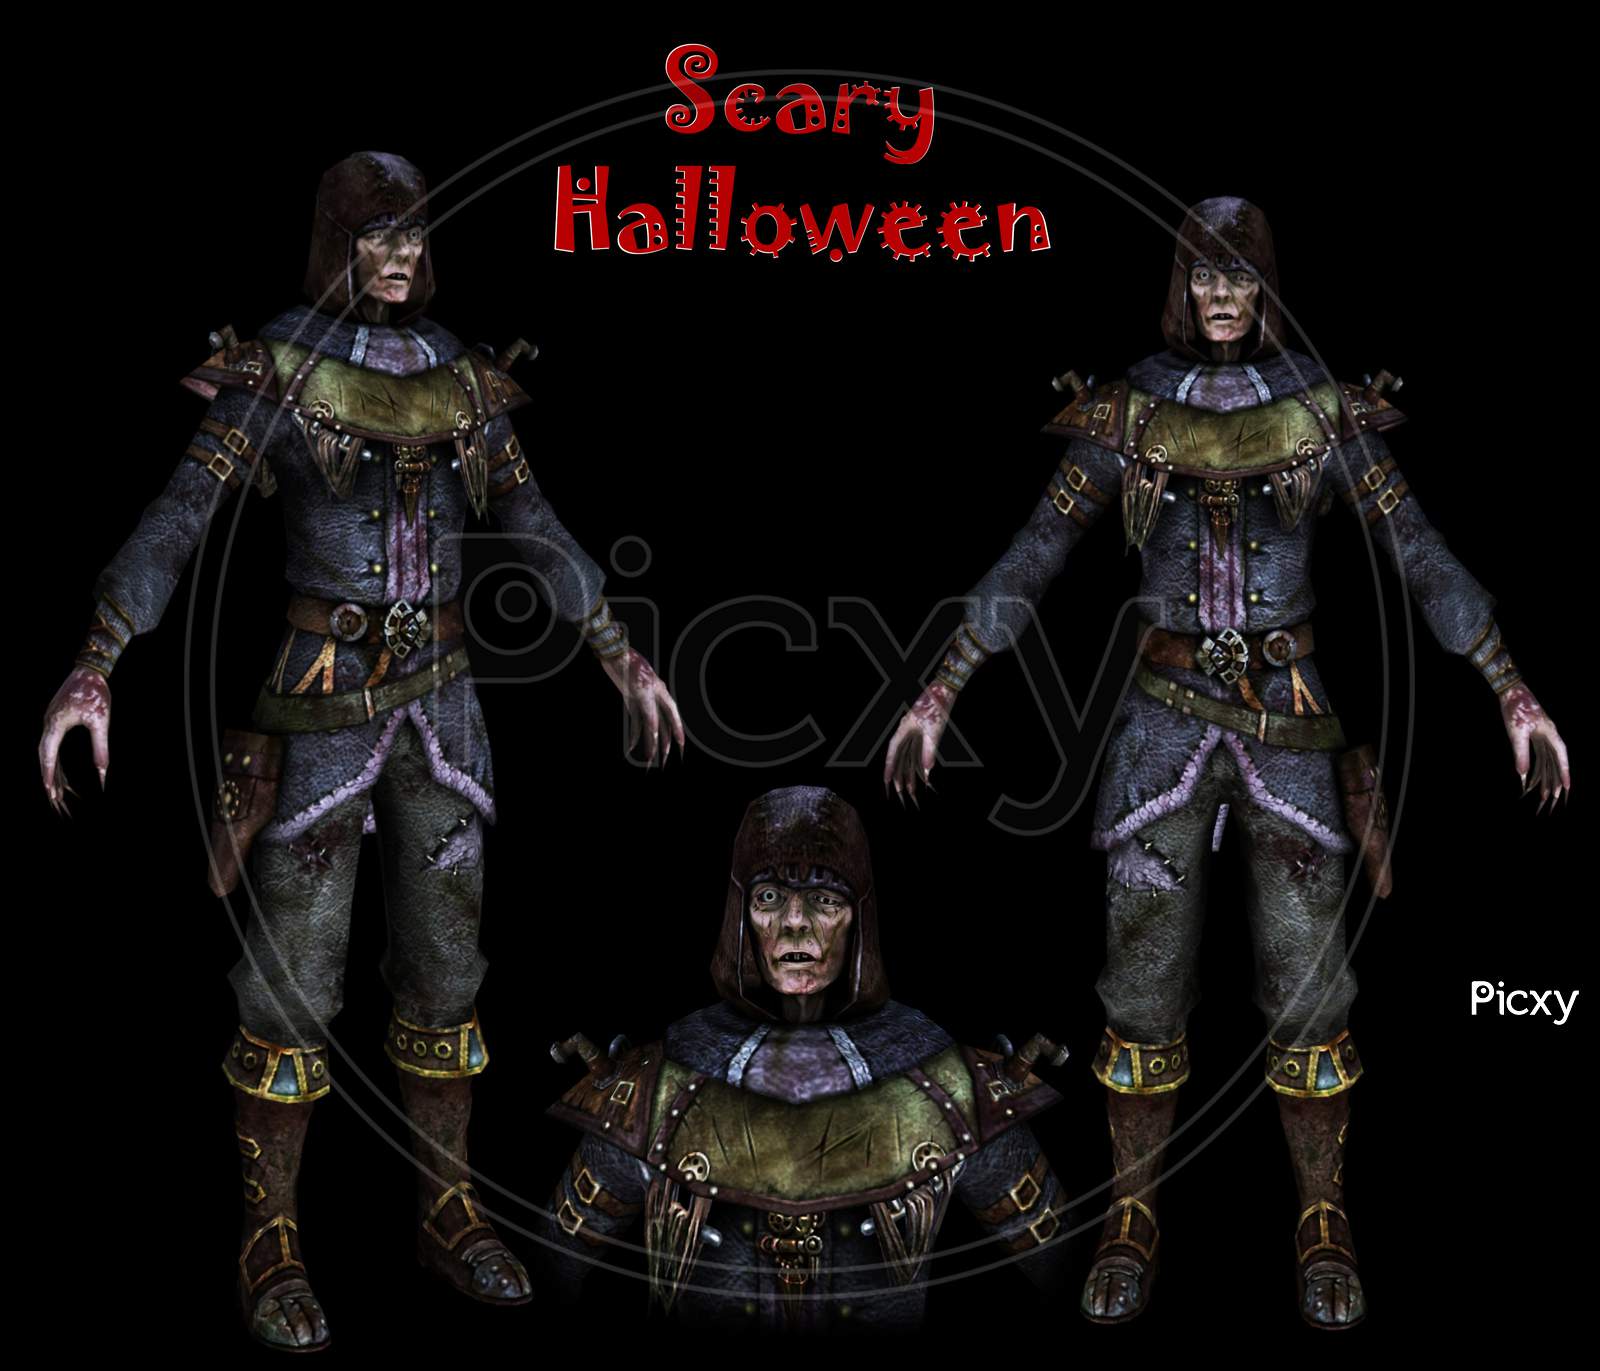 Spooky Dead Character Of Halloween Day Background